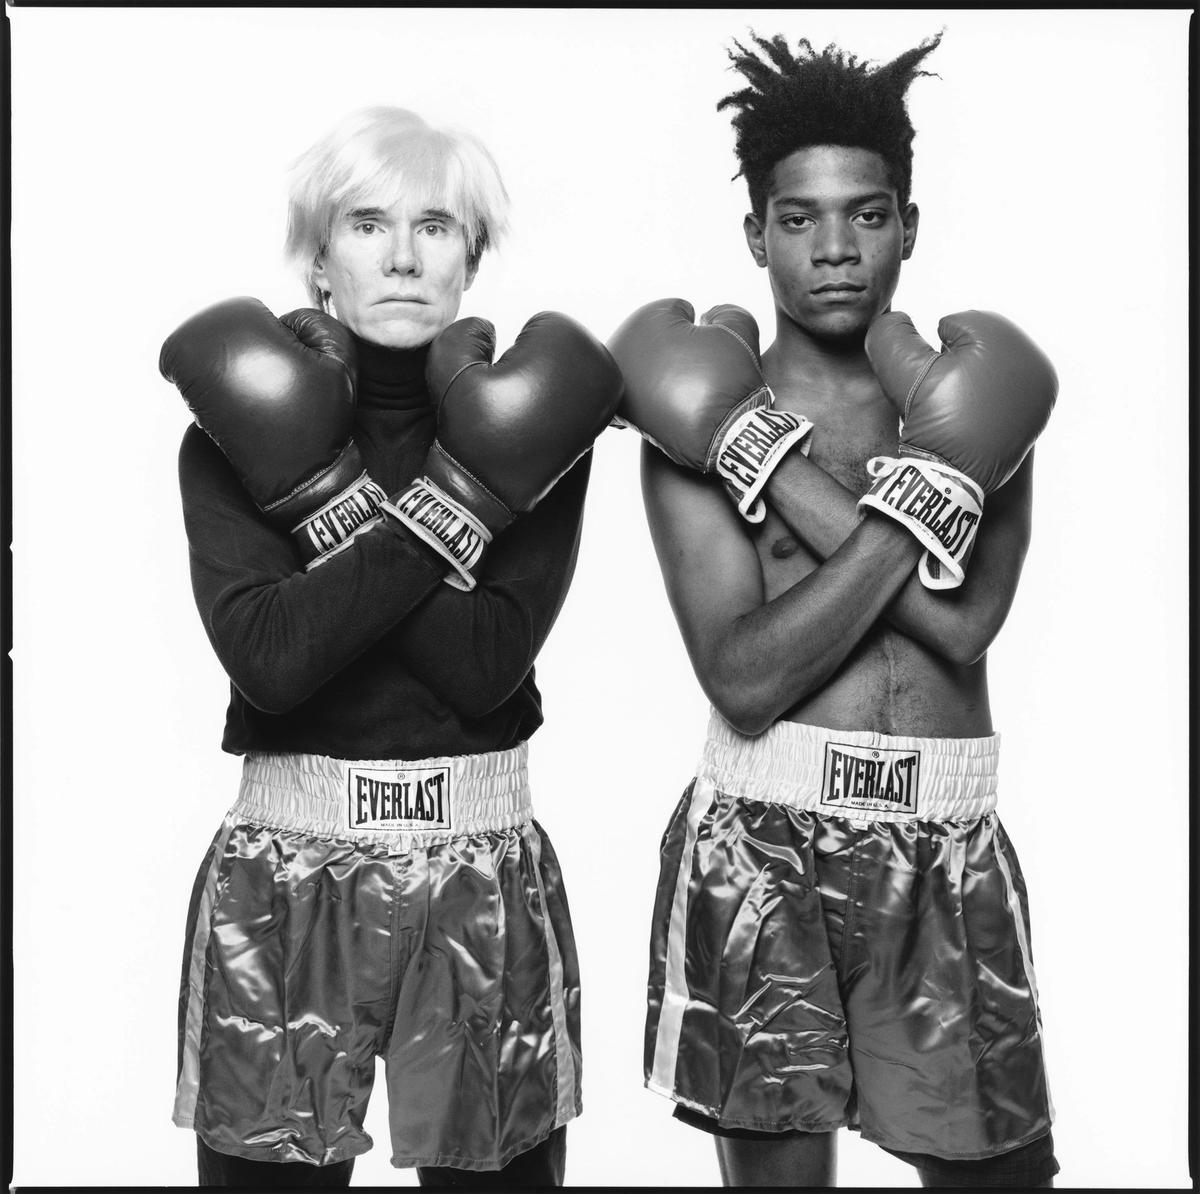 Warhol wanted Robert Mapplethorpe'—photographer of famous boxing shoot with  Jean-Michel Basquiat on how it came to be